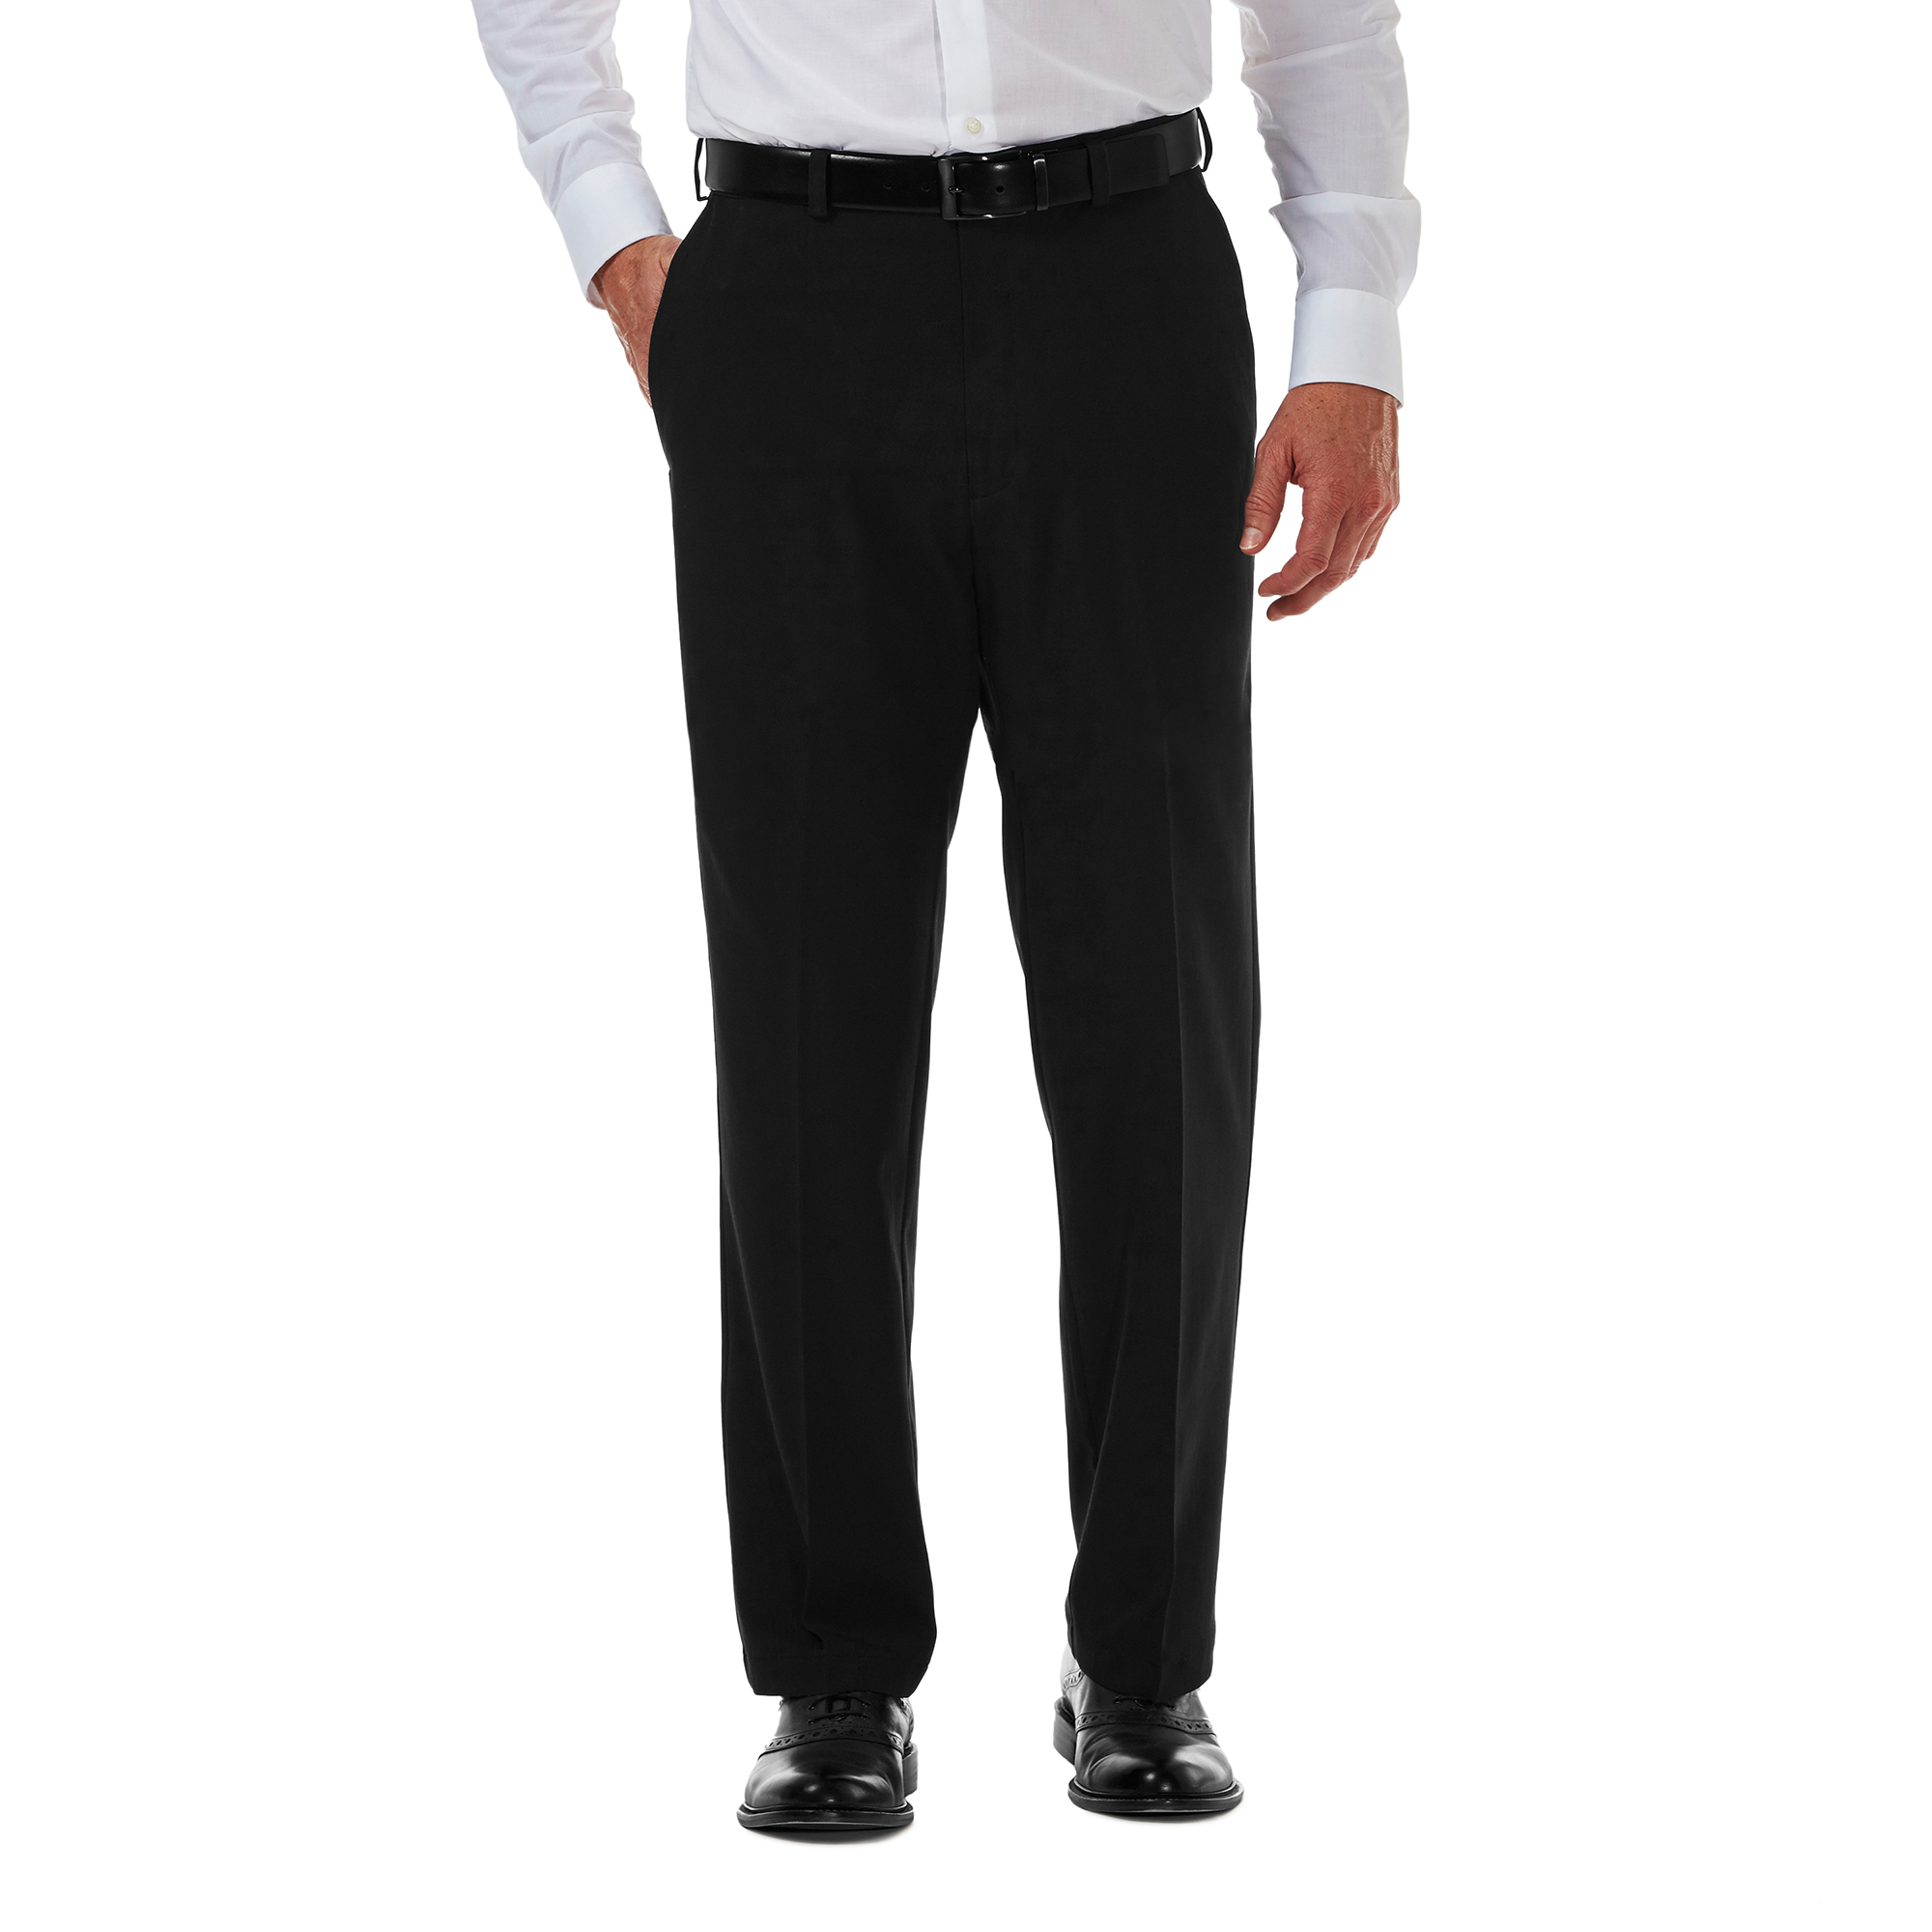 Haggar Mens Cool 18 Hidden Expandable Waist Pleat Front Pant Regular and Big & Tall Sizes 